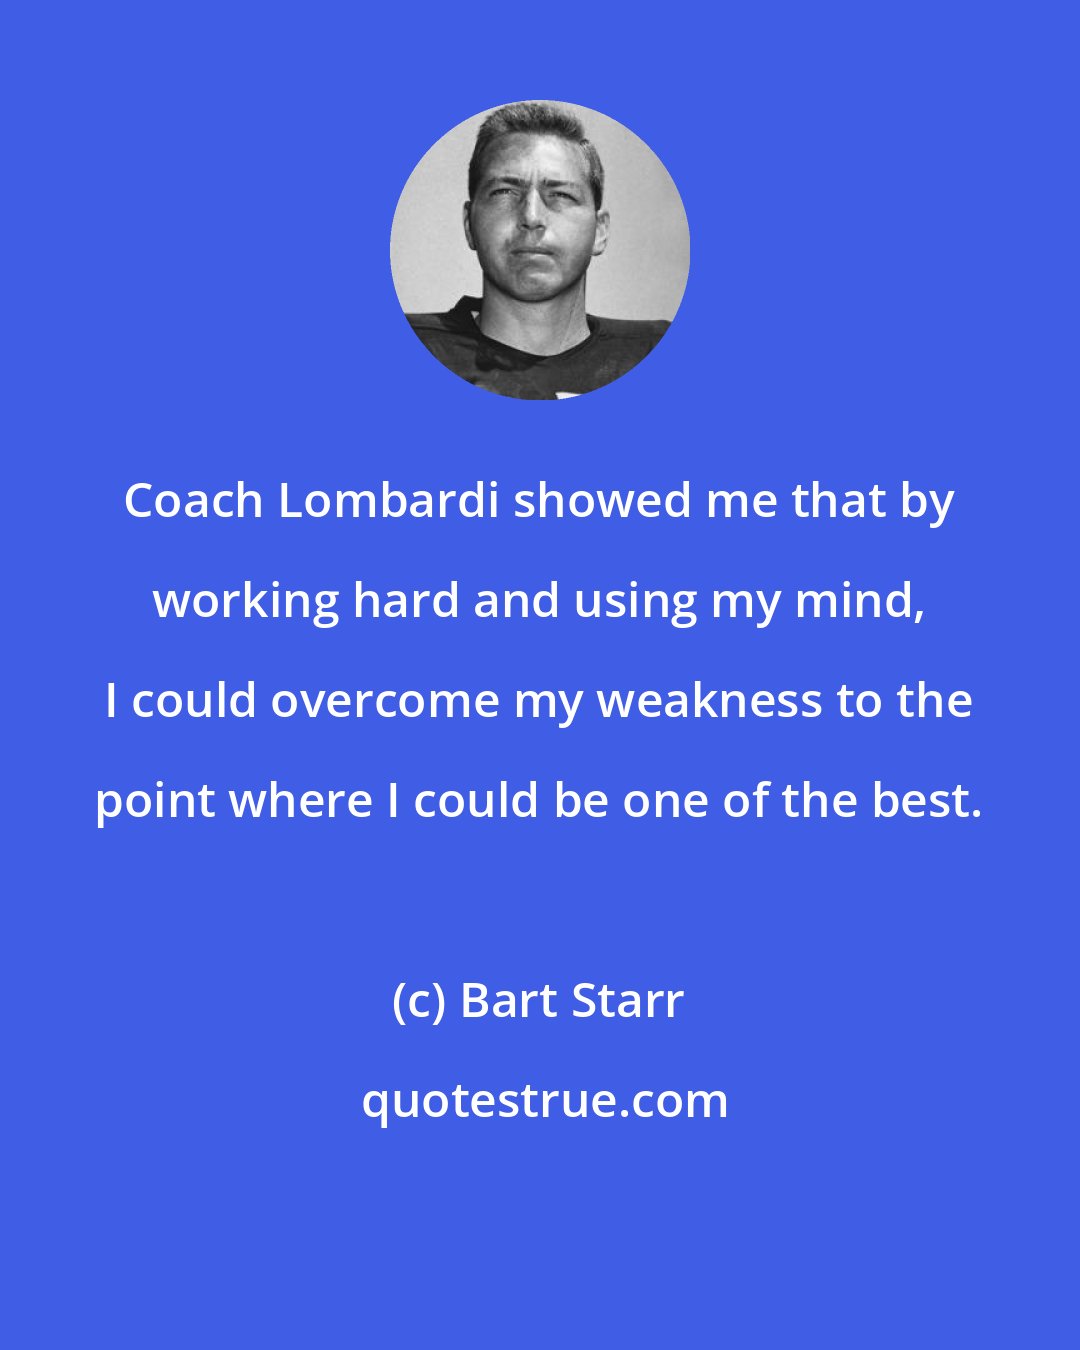 Bart Starr: Coach Lombardi showed me that by working hard and using my mind, I could overcome my weakness to the point where I could be one of the best.